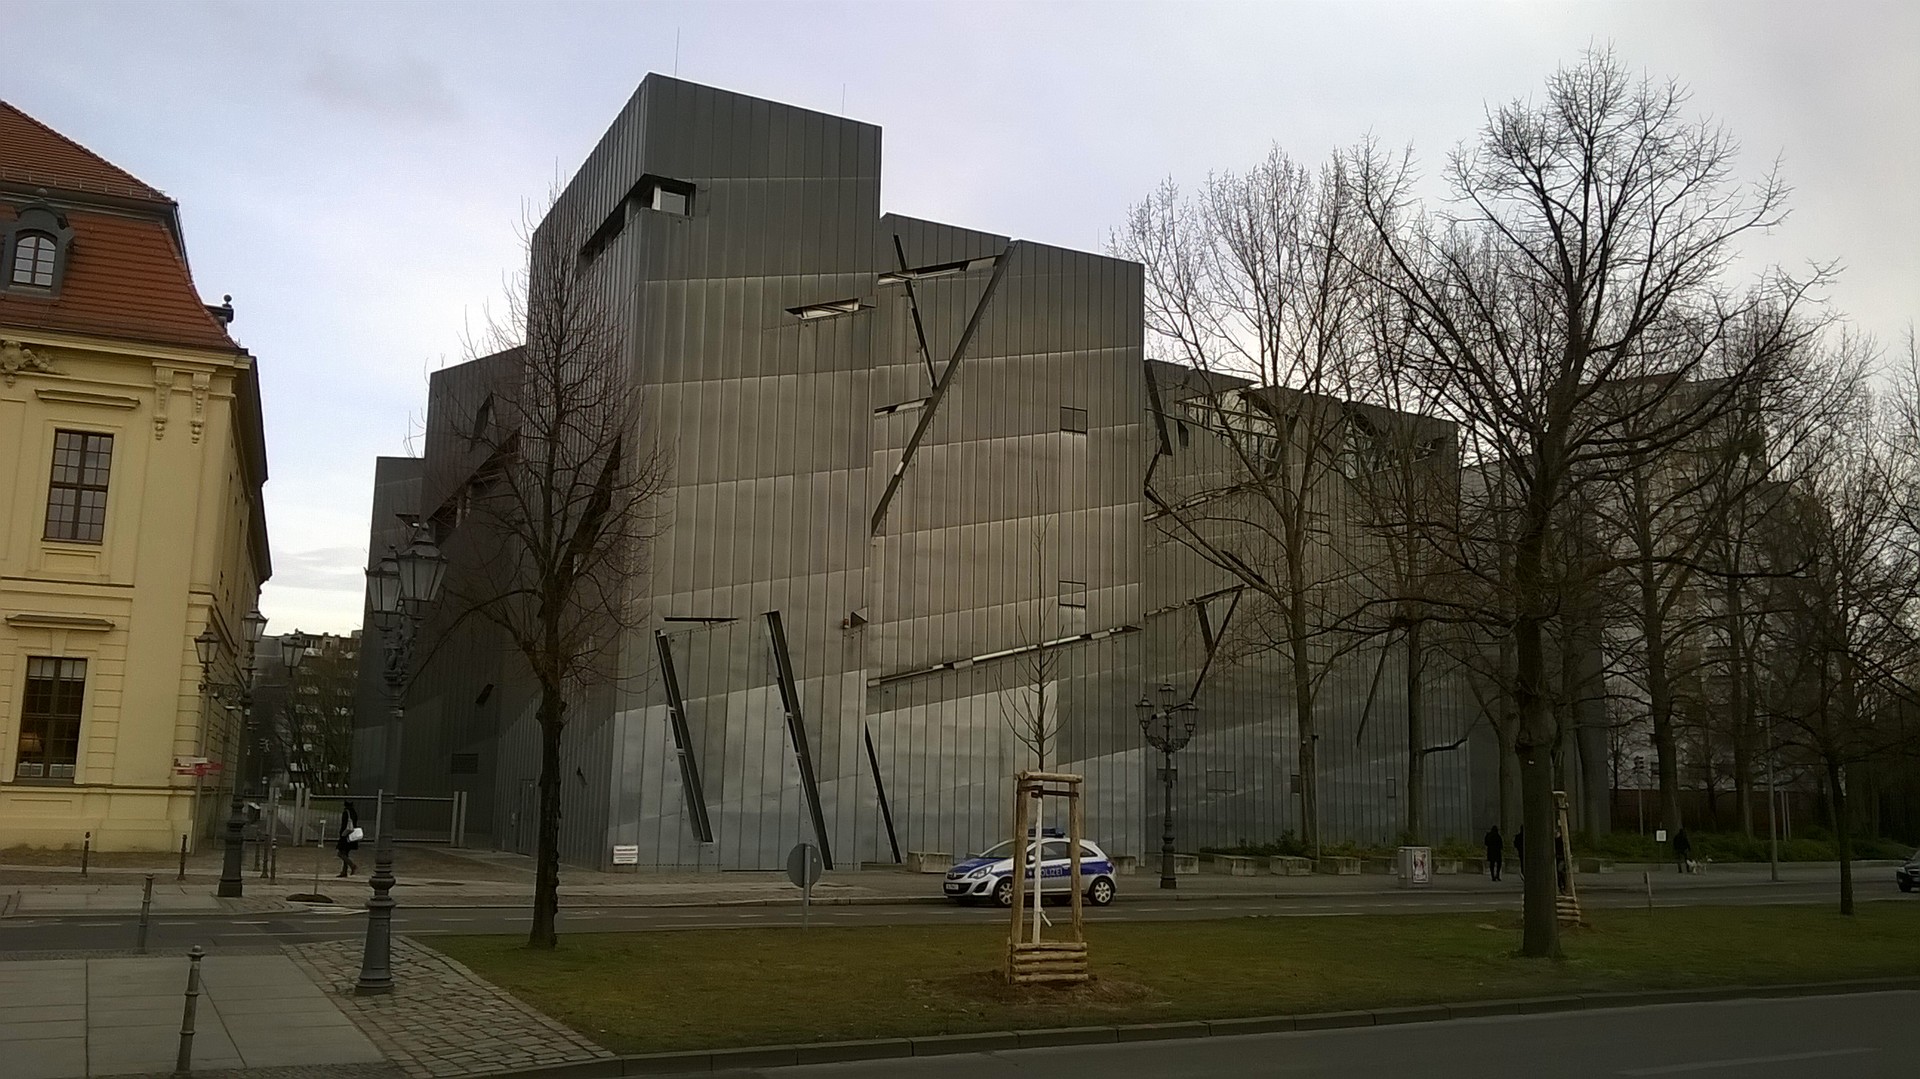 One of the best museums about the Holocaust in Europe